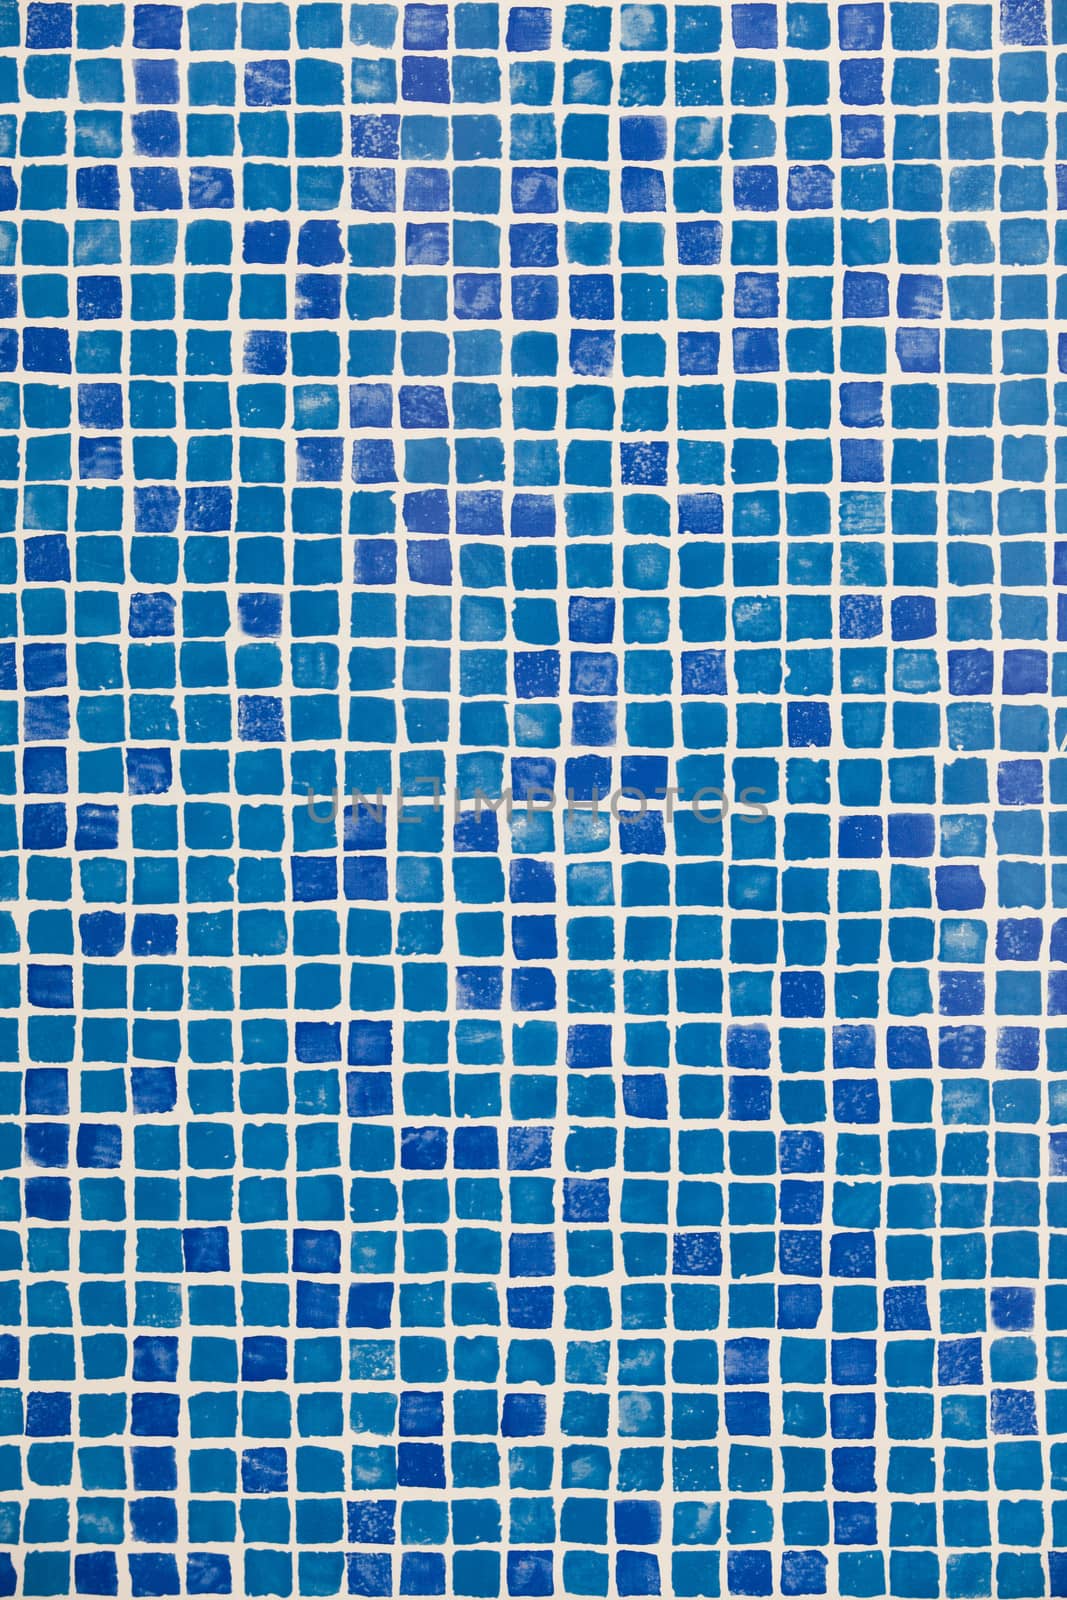 Swimming pool mosaic by wellphoto